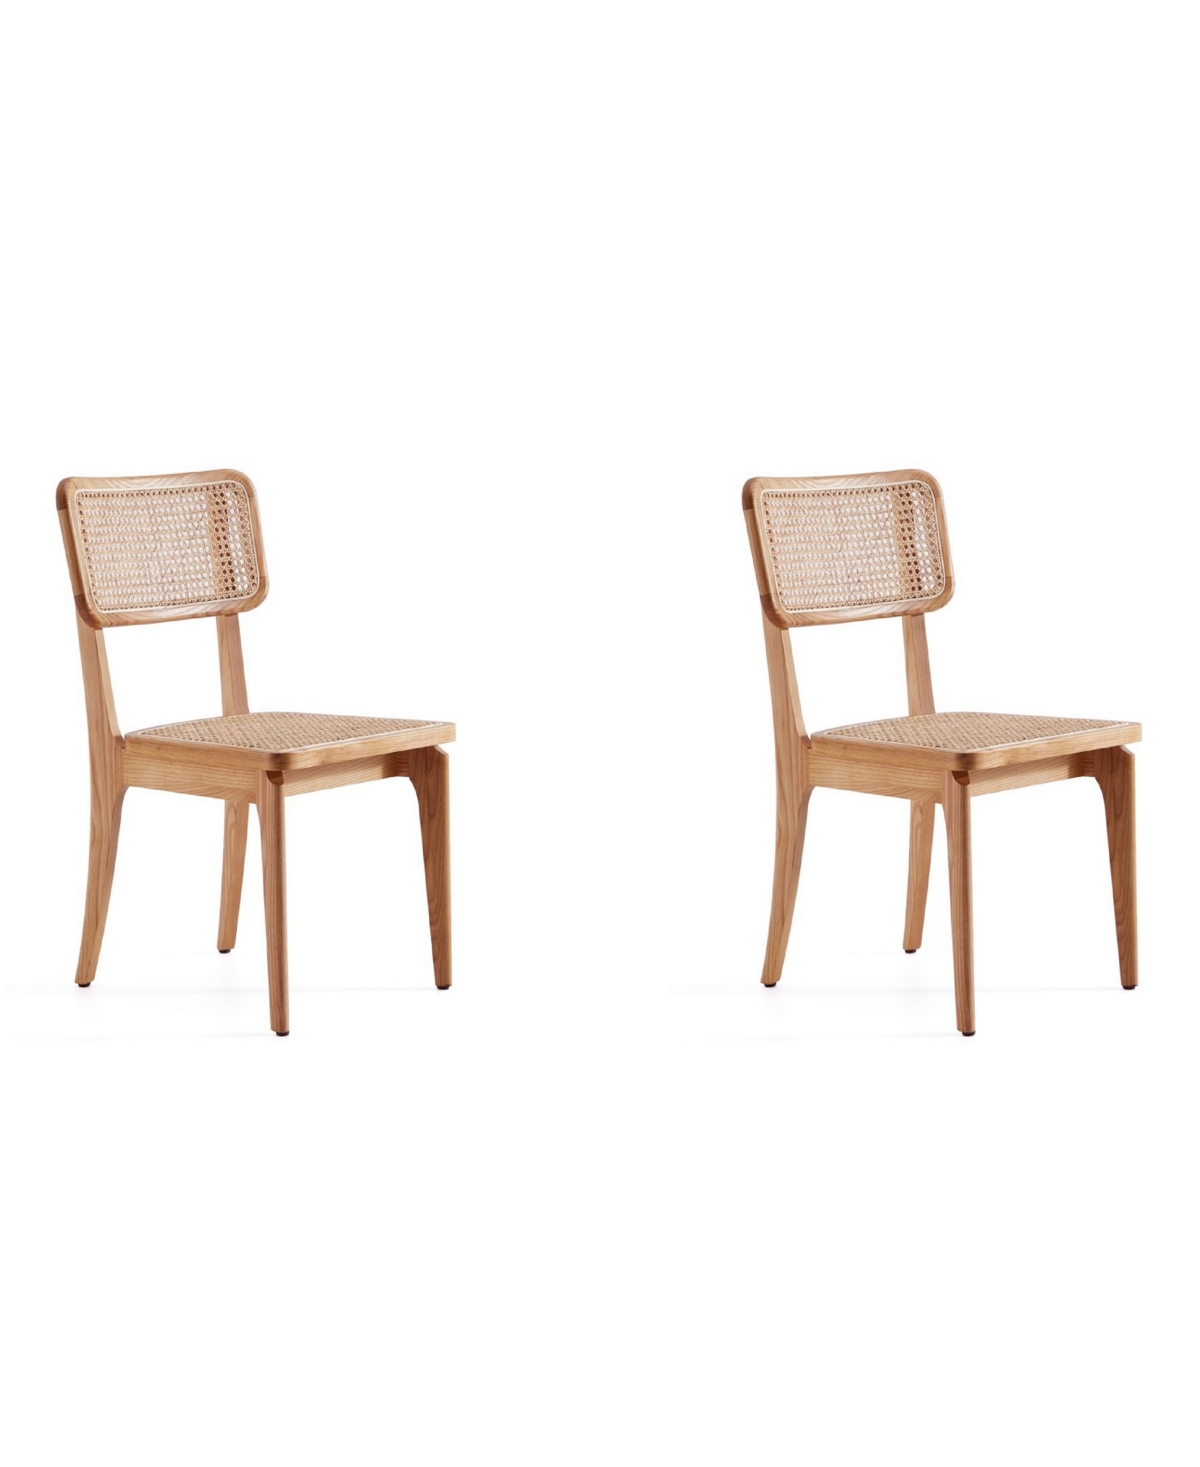 Manhattan Comfort Giverny 2-piece Ash Wood And Natural Cane Versatile Dining Chair In Nature